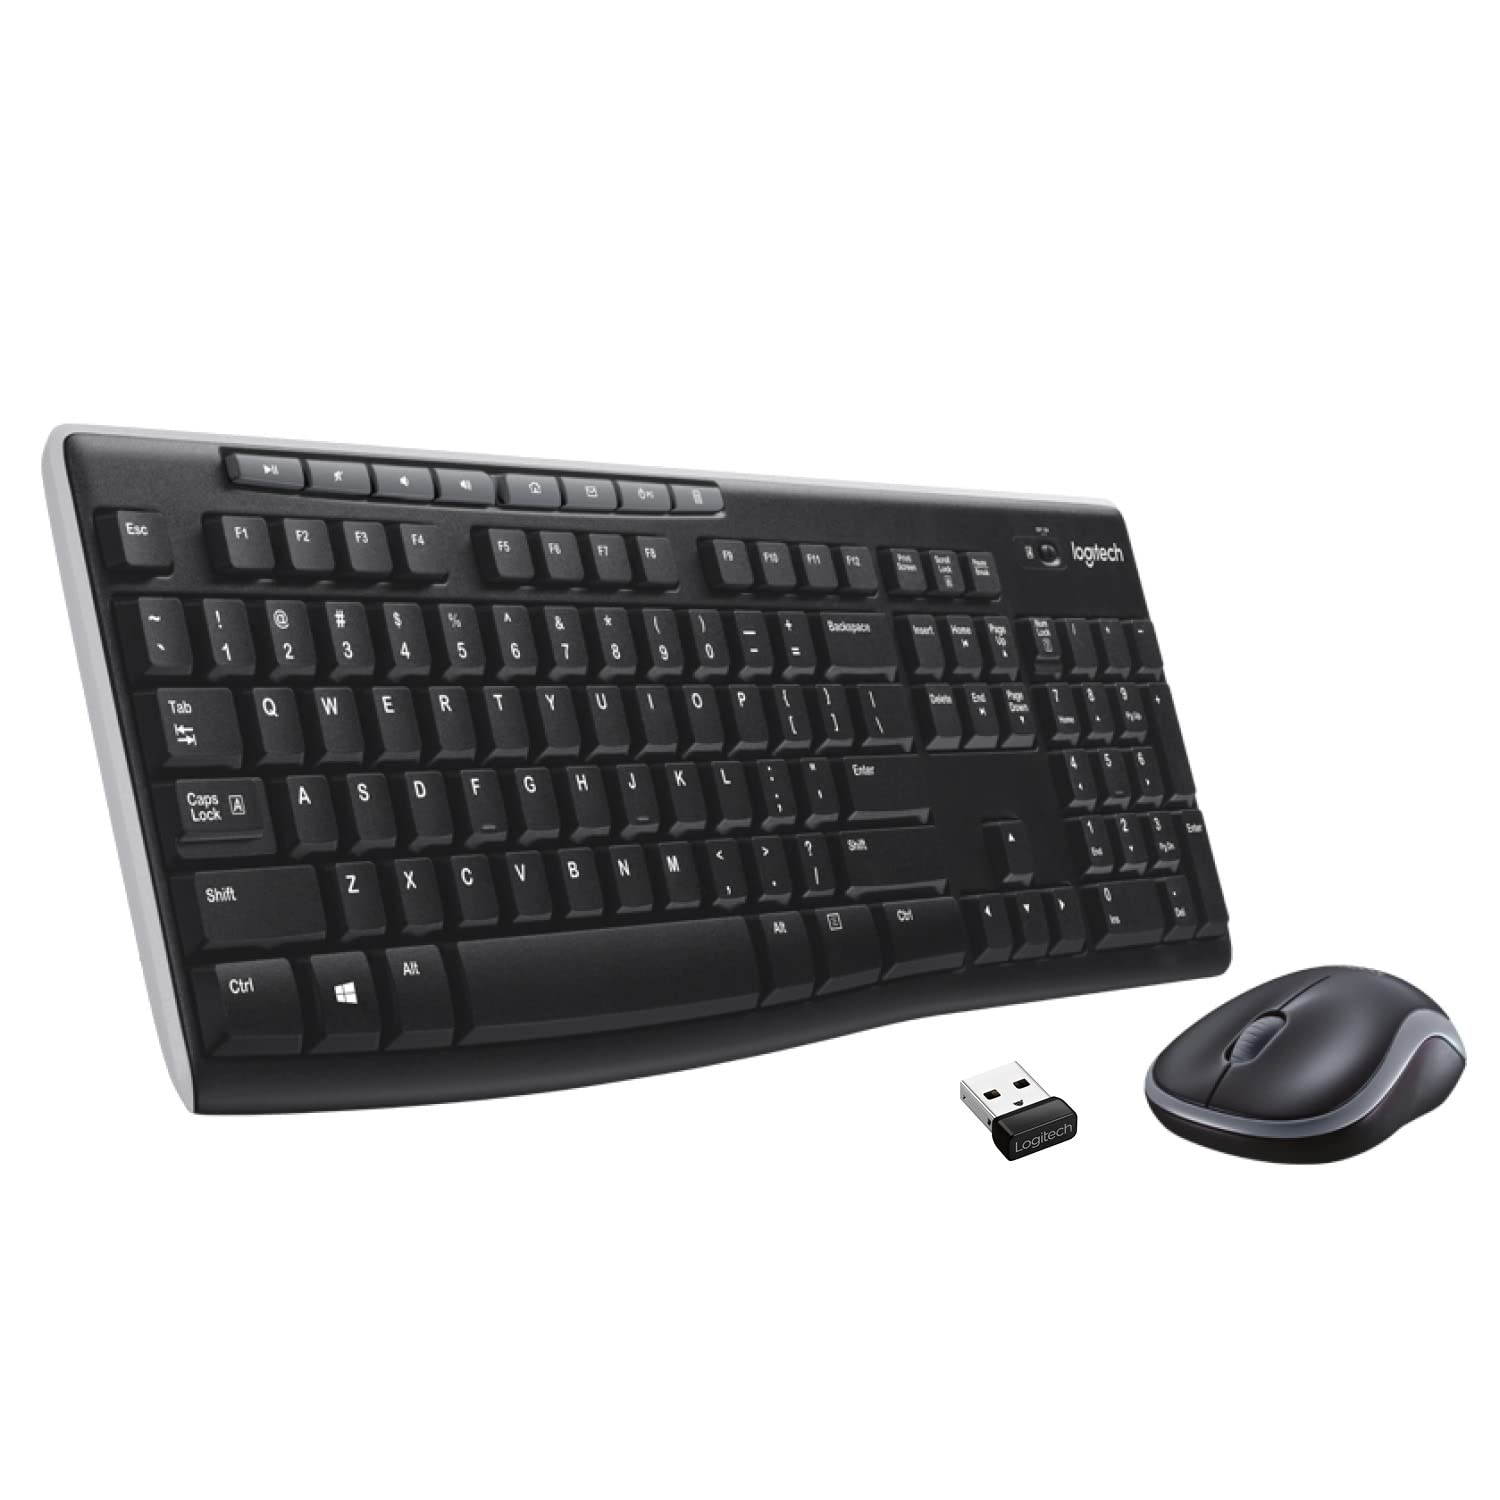 Logitech MK270 Wireless Straight Full Size Keyboard and Mouse Black $19.99 at Office Depot